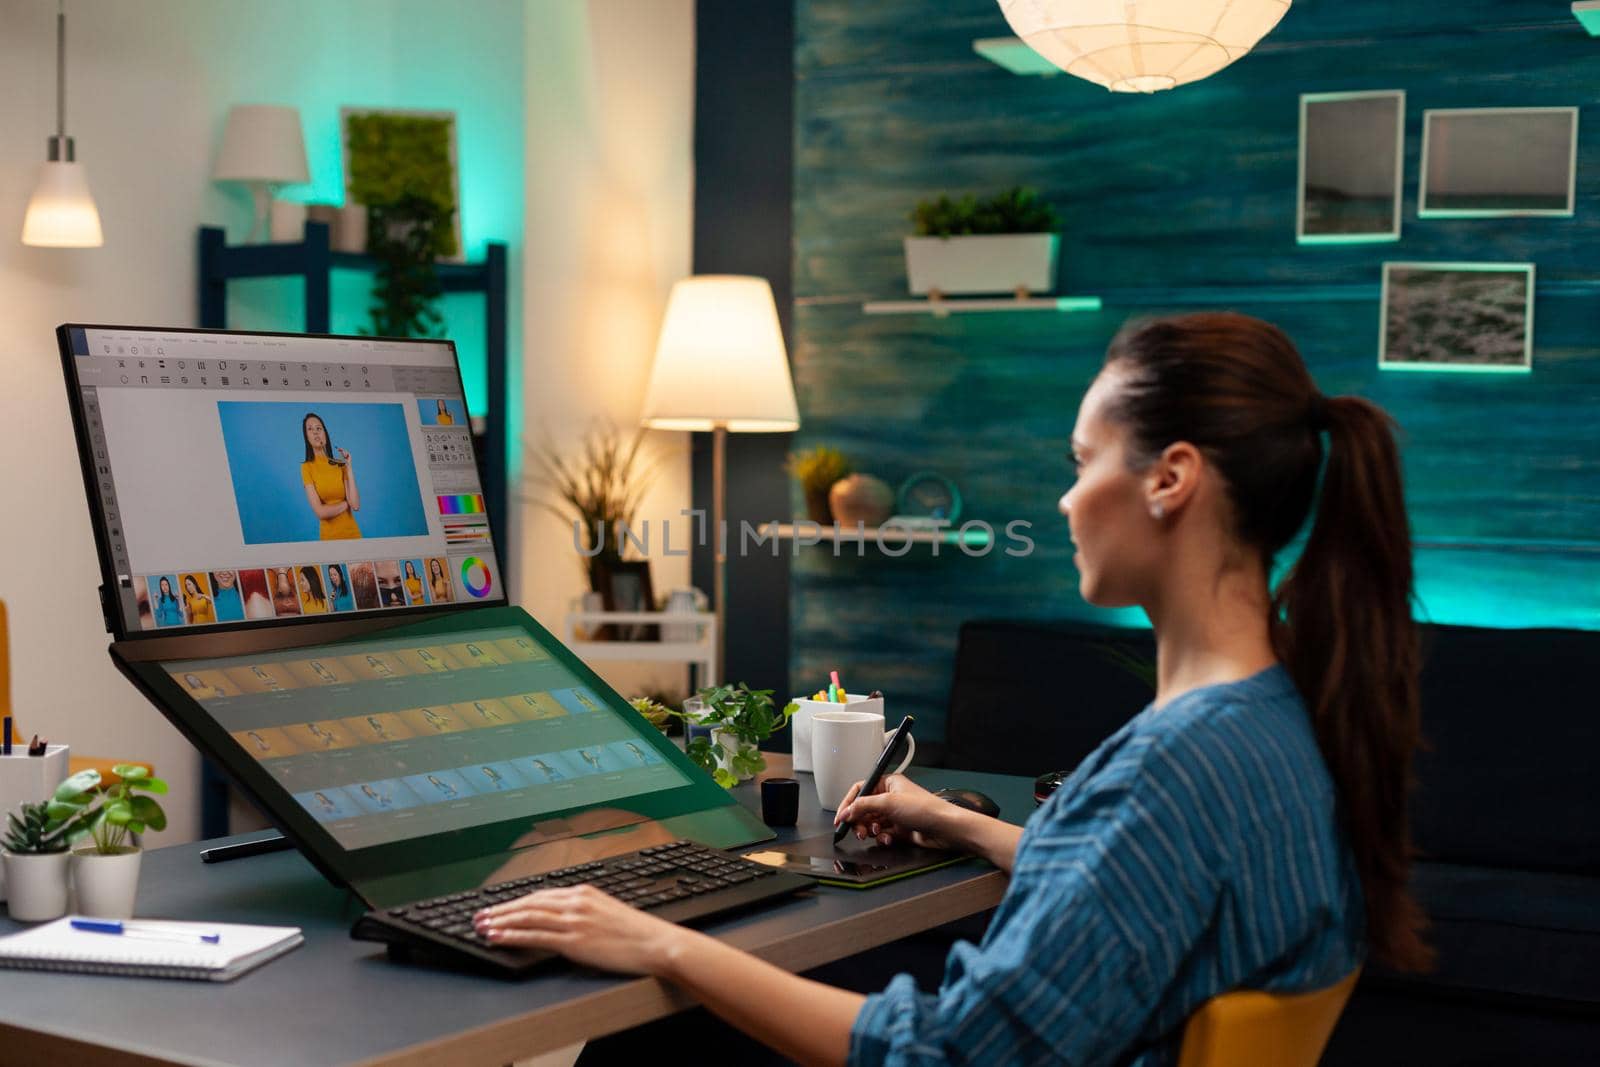 Retouch studio worker editing picture of model for photography agency. Caucasian artistic creative woman looking at computer monitor screen and photo retouching template software